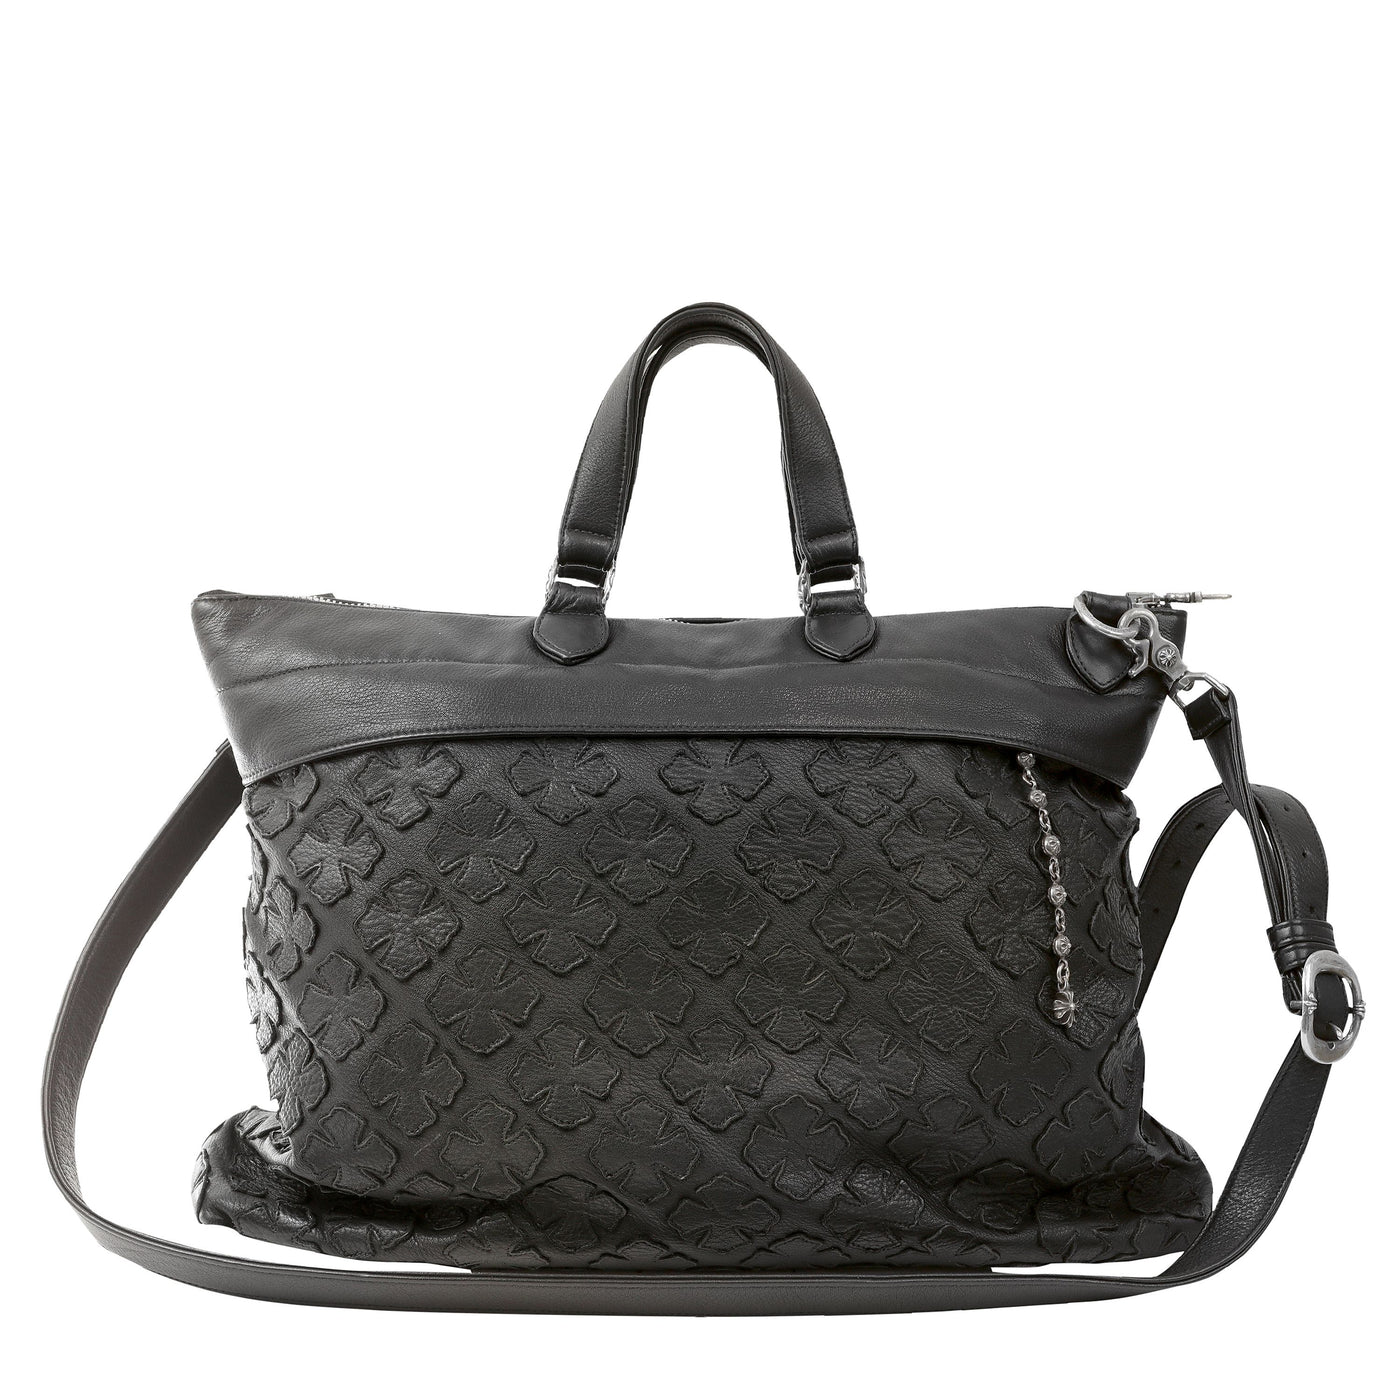 Chrome Hearts Black Leather Tote with Cross Applique